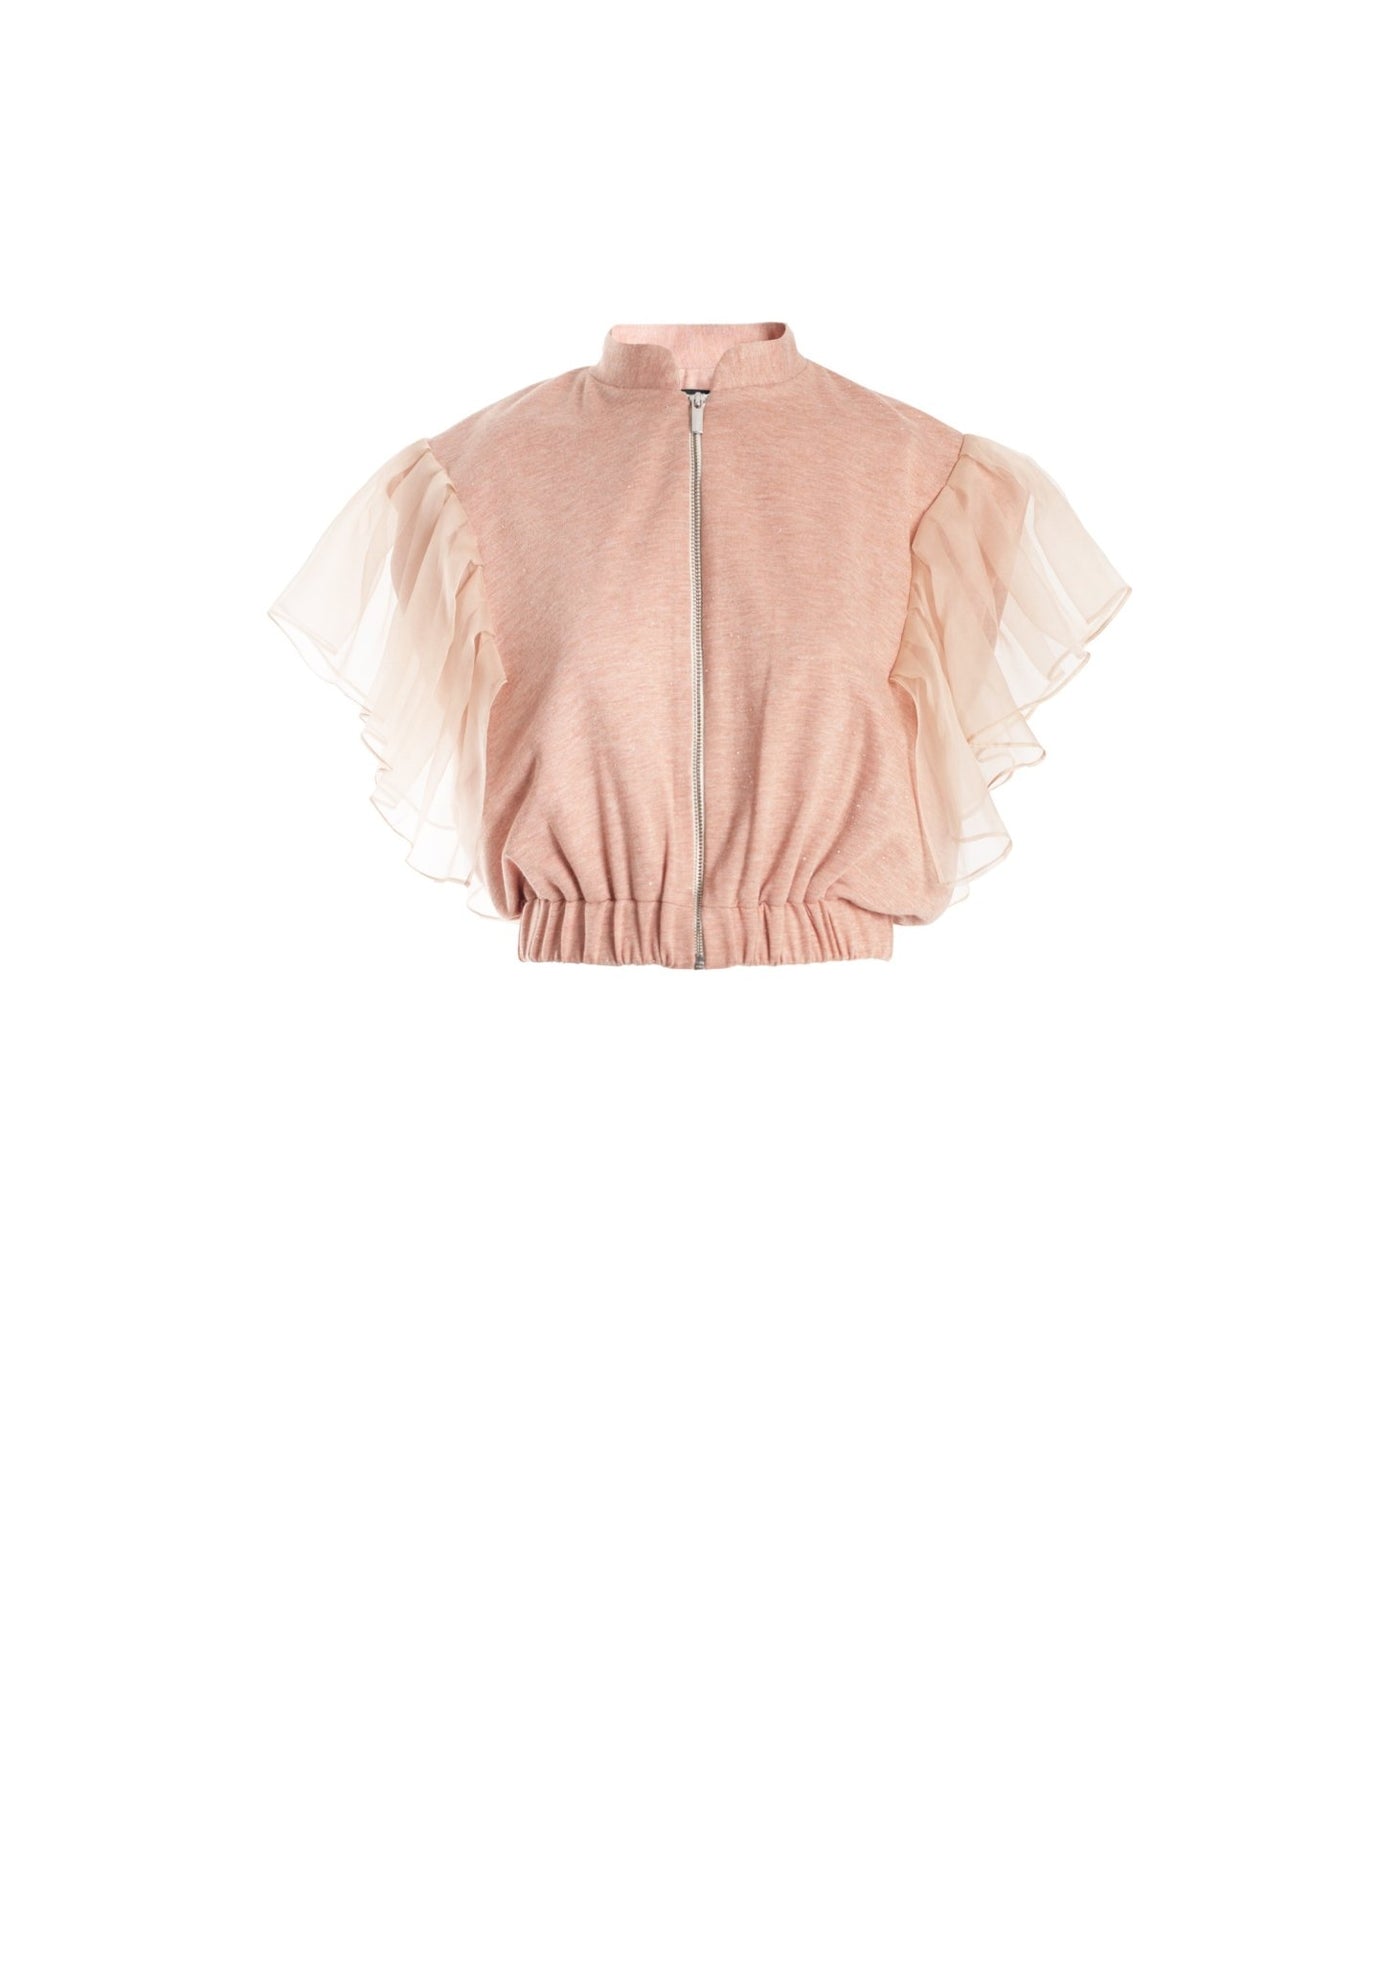 Organza Bomber Jacket - The Clothing LoungeNOPIN